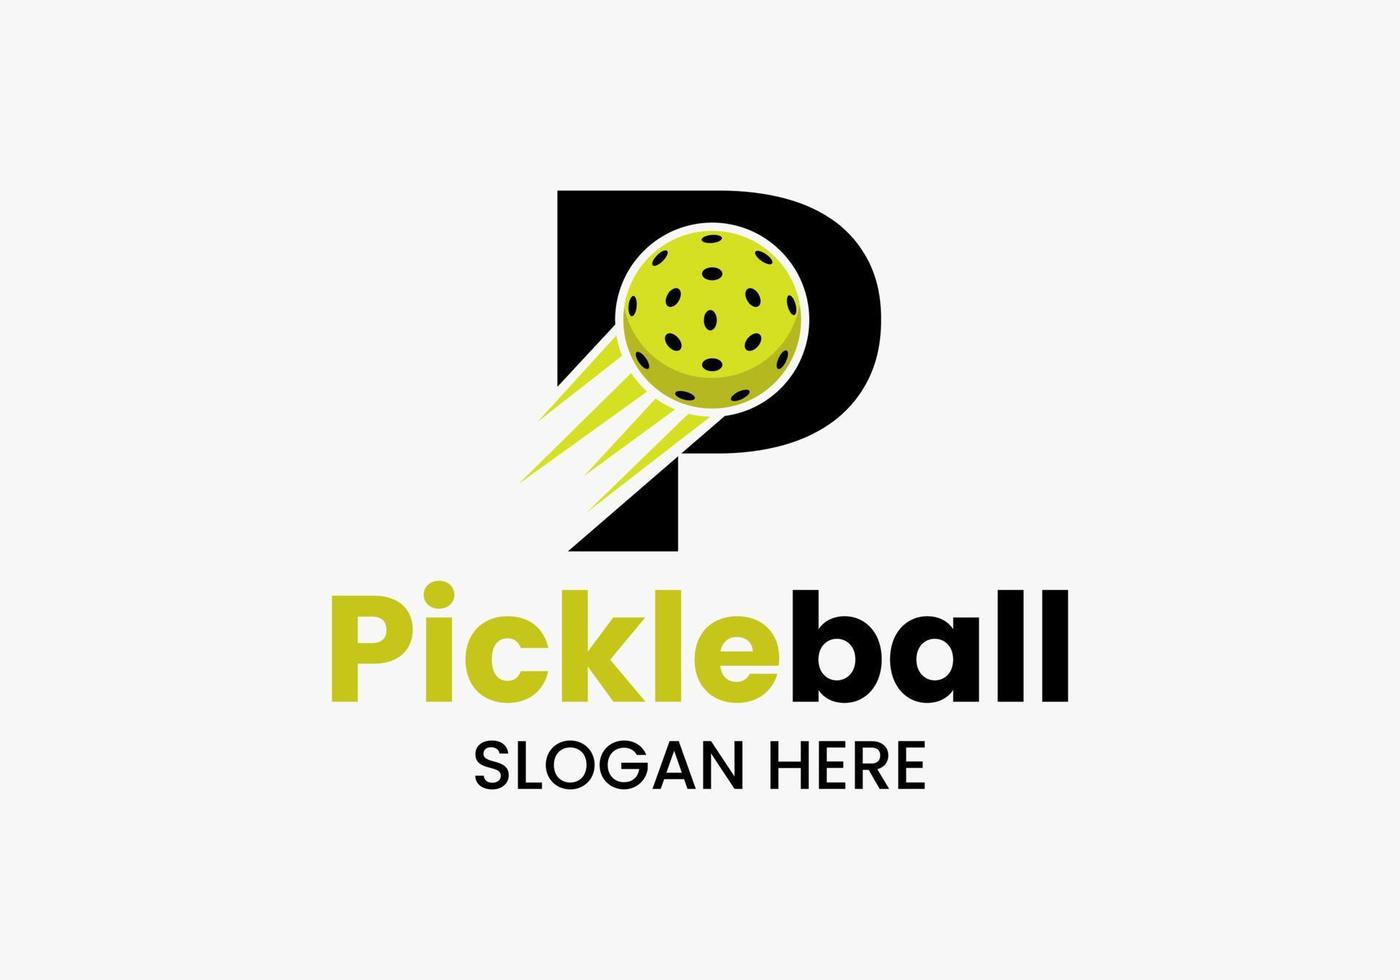 Letter P Pickleball Logo Concept With Moving Pickleball Symbol. Pickle Ball Logotype Vector Template